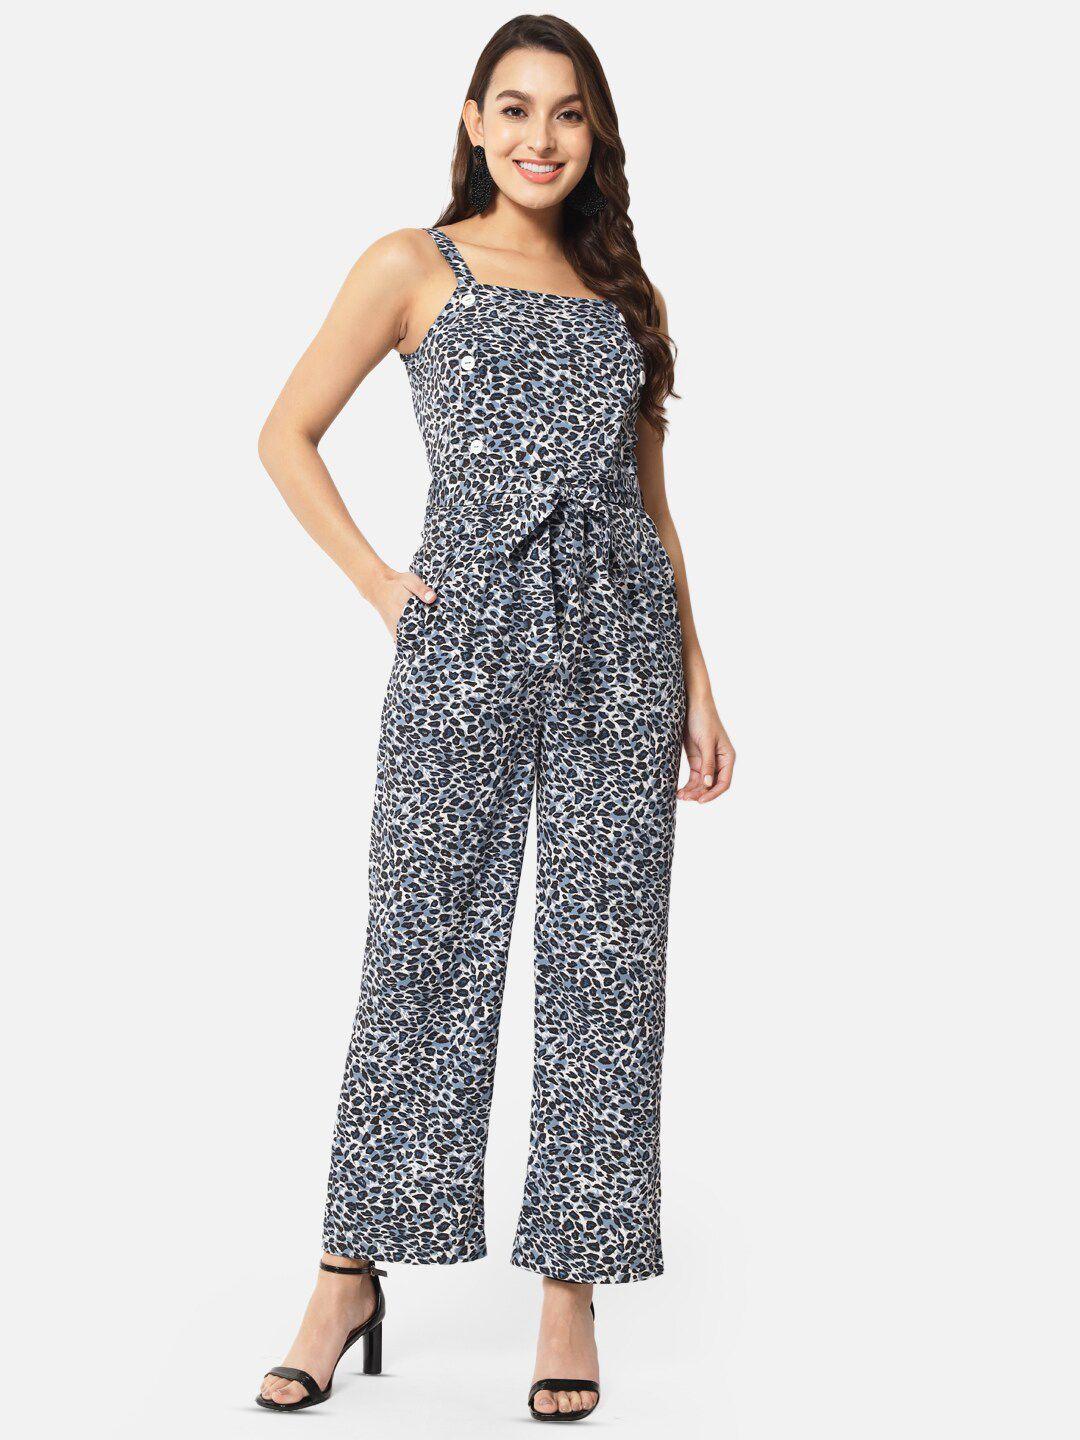 baesd-abstract-printed-shoulder-straps-waist-tie-ups-basic-jumpsuit